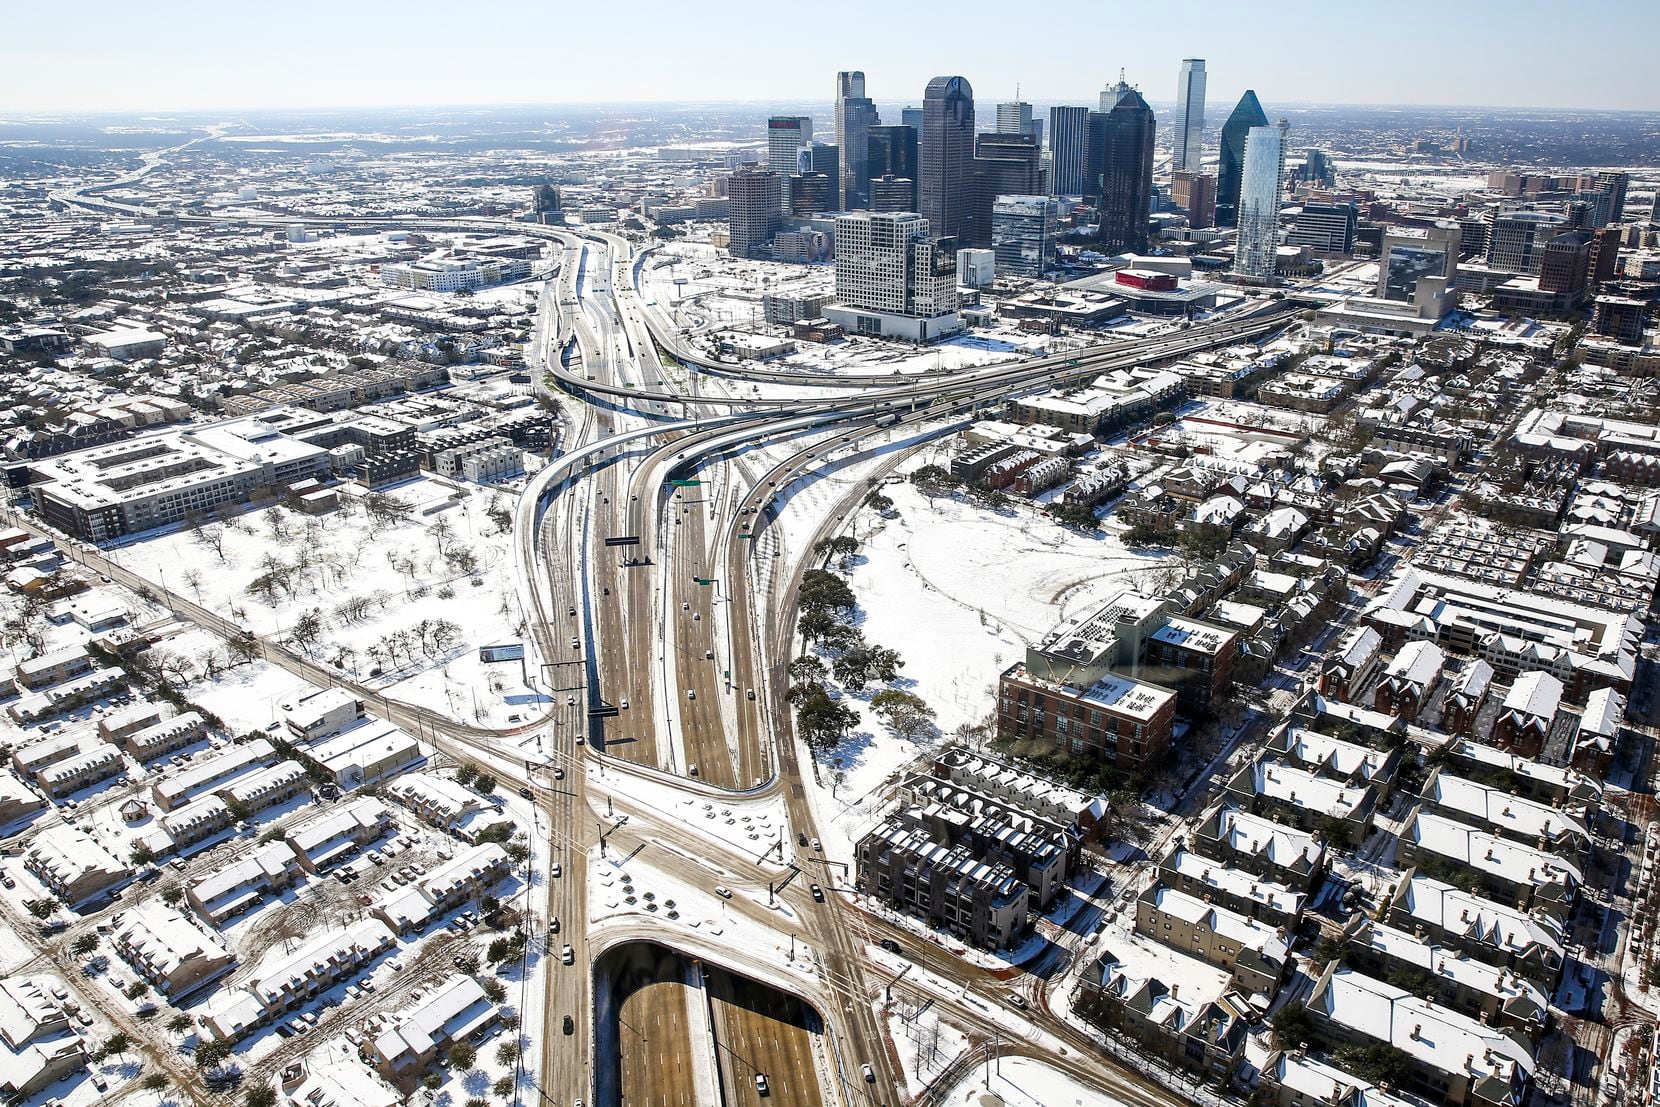 Snow covers downtown Dallas after a record snowfall on Thursday, March 5, 2015. Overnight snow and sleet blanketed the region overnight piling up to 2 to 5 inches across much of the area.  (Smiley N. Pool/The Dallas Morning News) [ 2015 PUB - 2015MARCH ] 03072015xALDIA